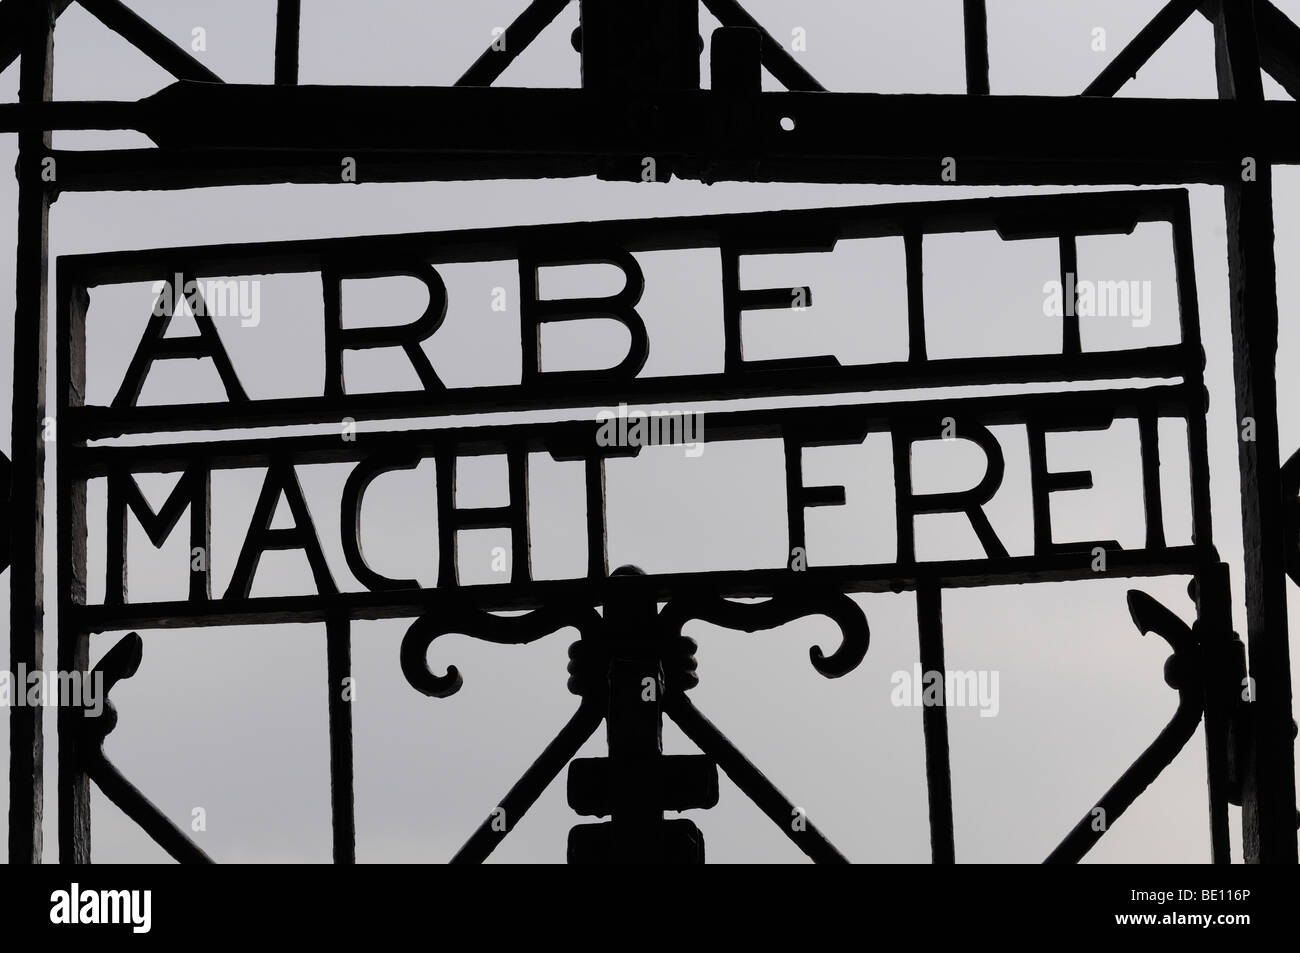 Arbeit macht frei sign on entrance gate  to Dachau concentration camp, Germany Stock Photo